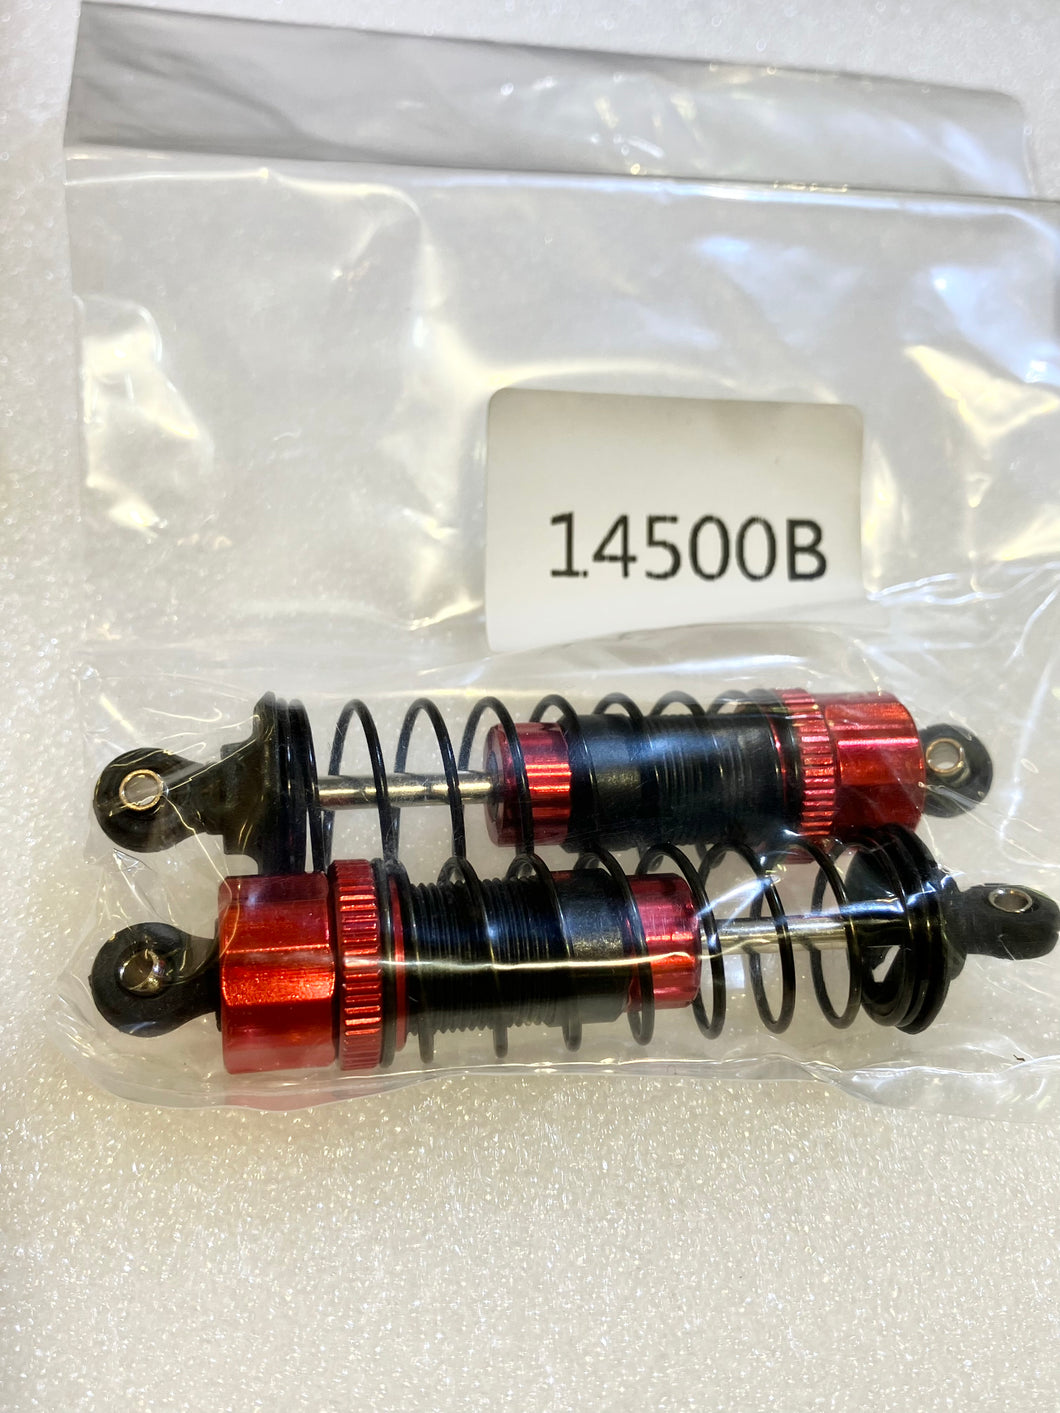 MJX spare part no. 14500B Front Oil Filled Shock Absorbers 2 pcs for MJX 14209 14210 RC Truck